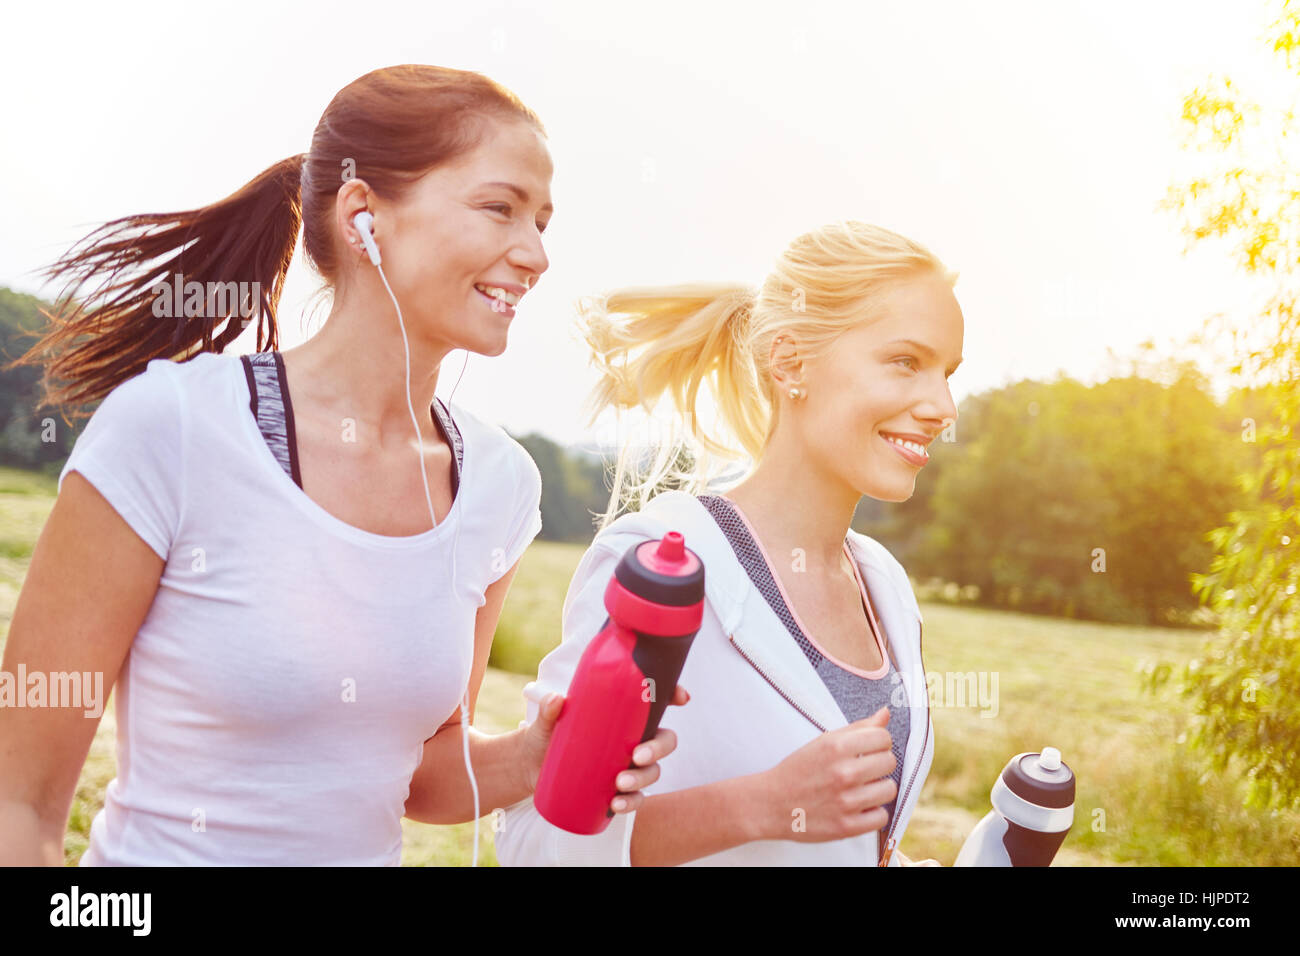 Two young women running together in the park Stock Photo